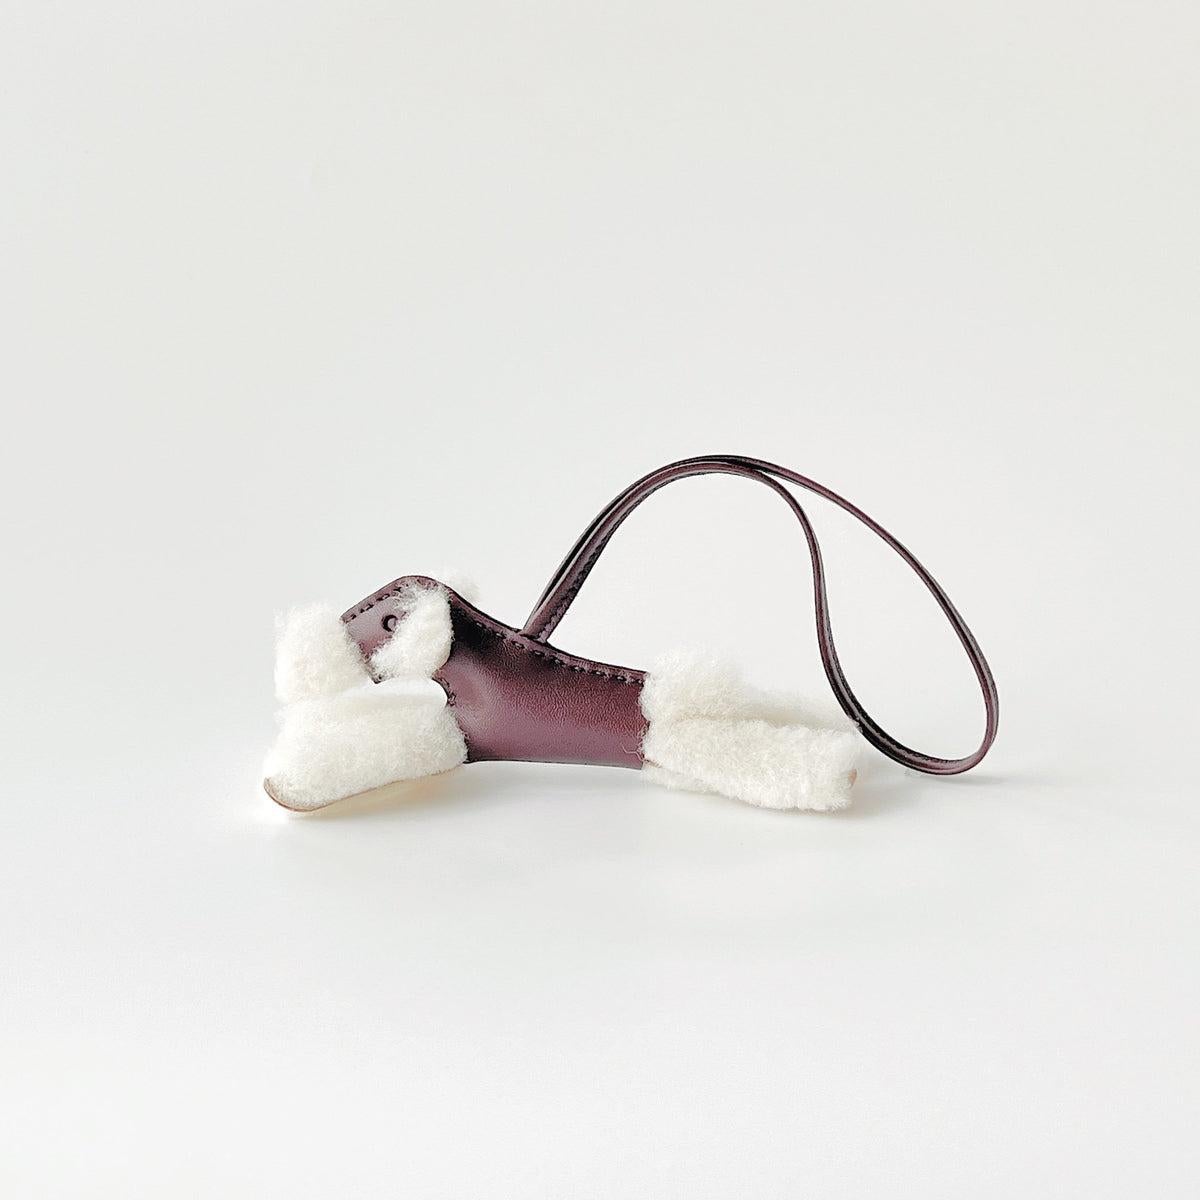 A elegant Hermès Shearling Buddy Bag Charm, in Rouge Sellier lambskin leather and Merino Wool. This playful & chic bag charm is the perfect paring for any Hermès bag. 

Brand: Hermès
Colour: Rouge Sellier & Merino Shearling
Material: Milo Lambskin &